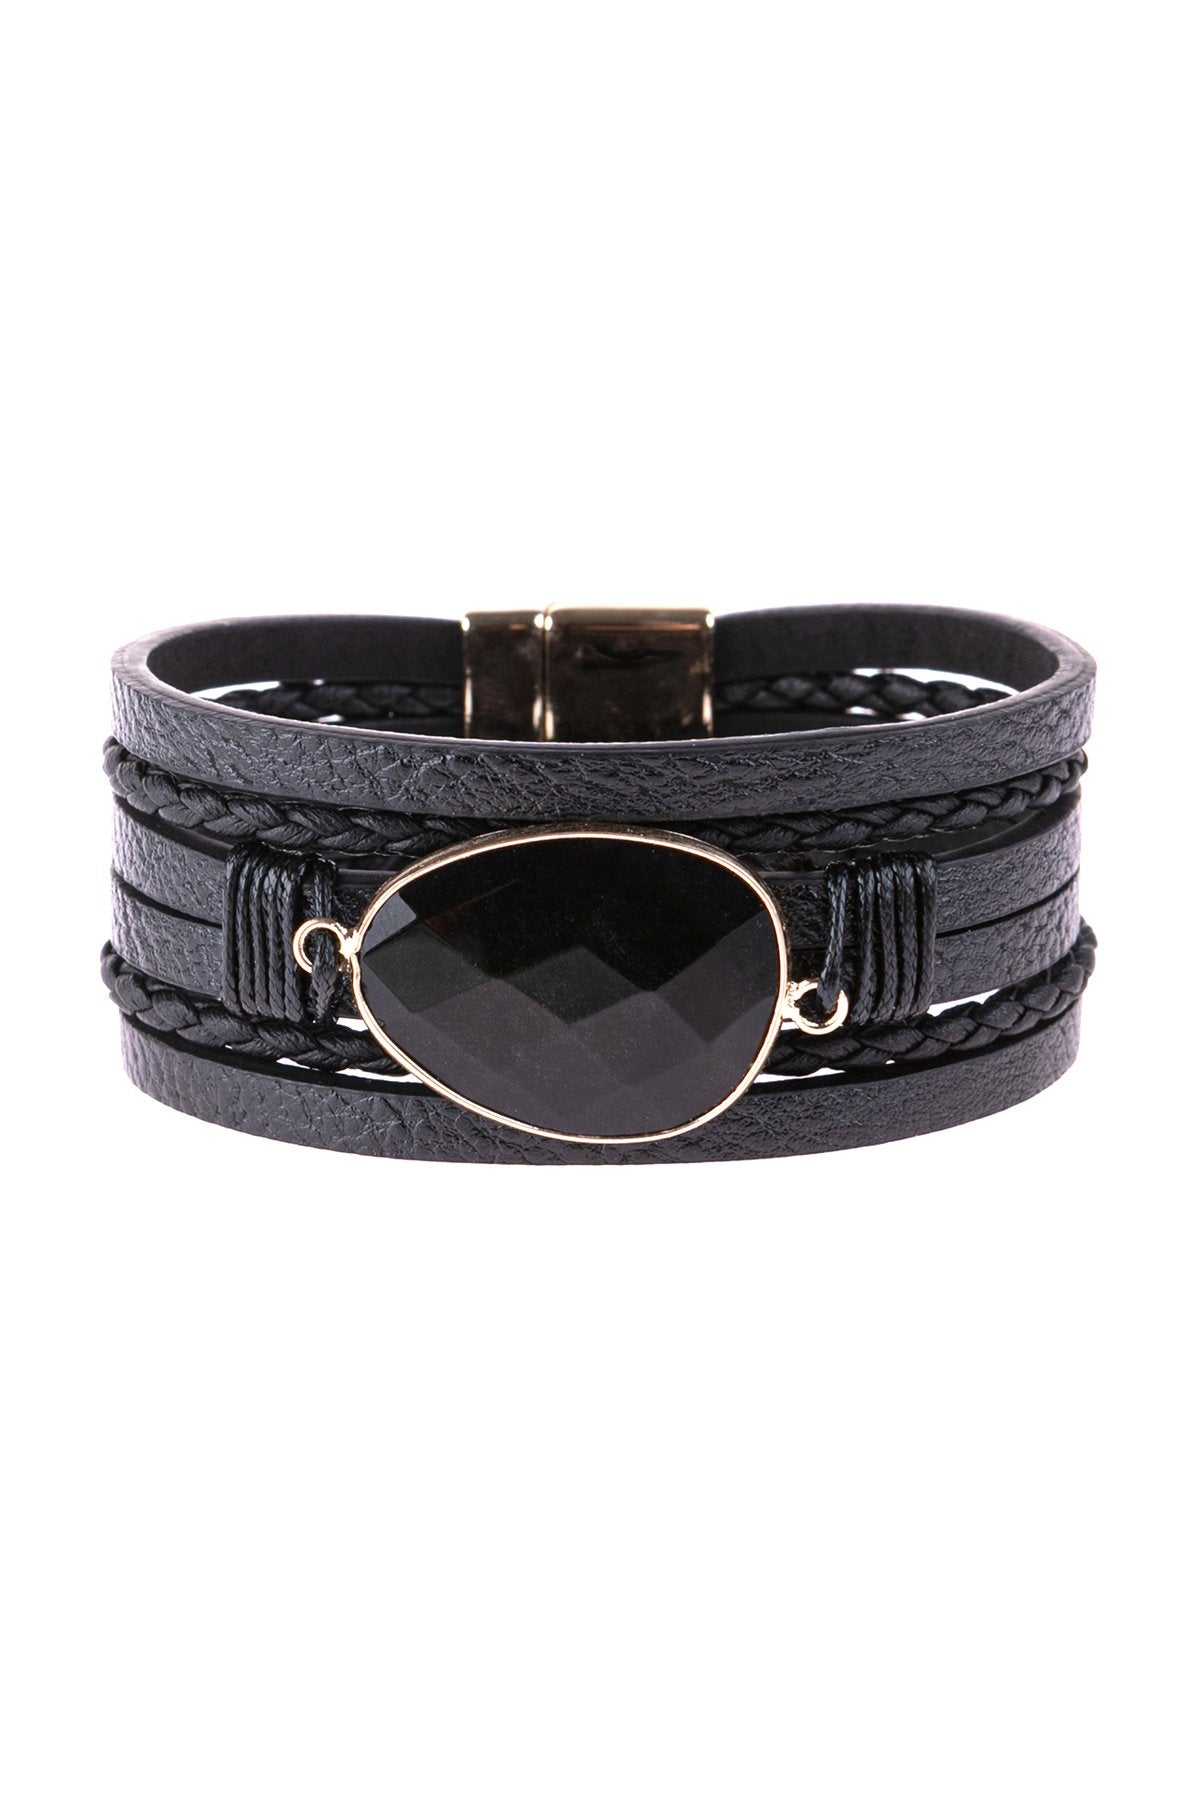 Hdb3124 - Multi Line Leather With Magnetic Lock Charm Bracelet